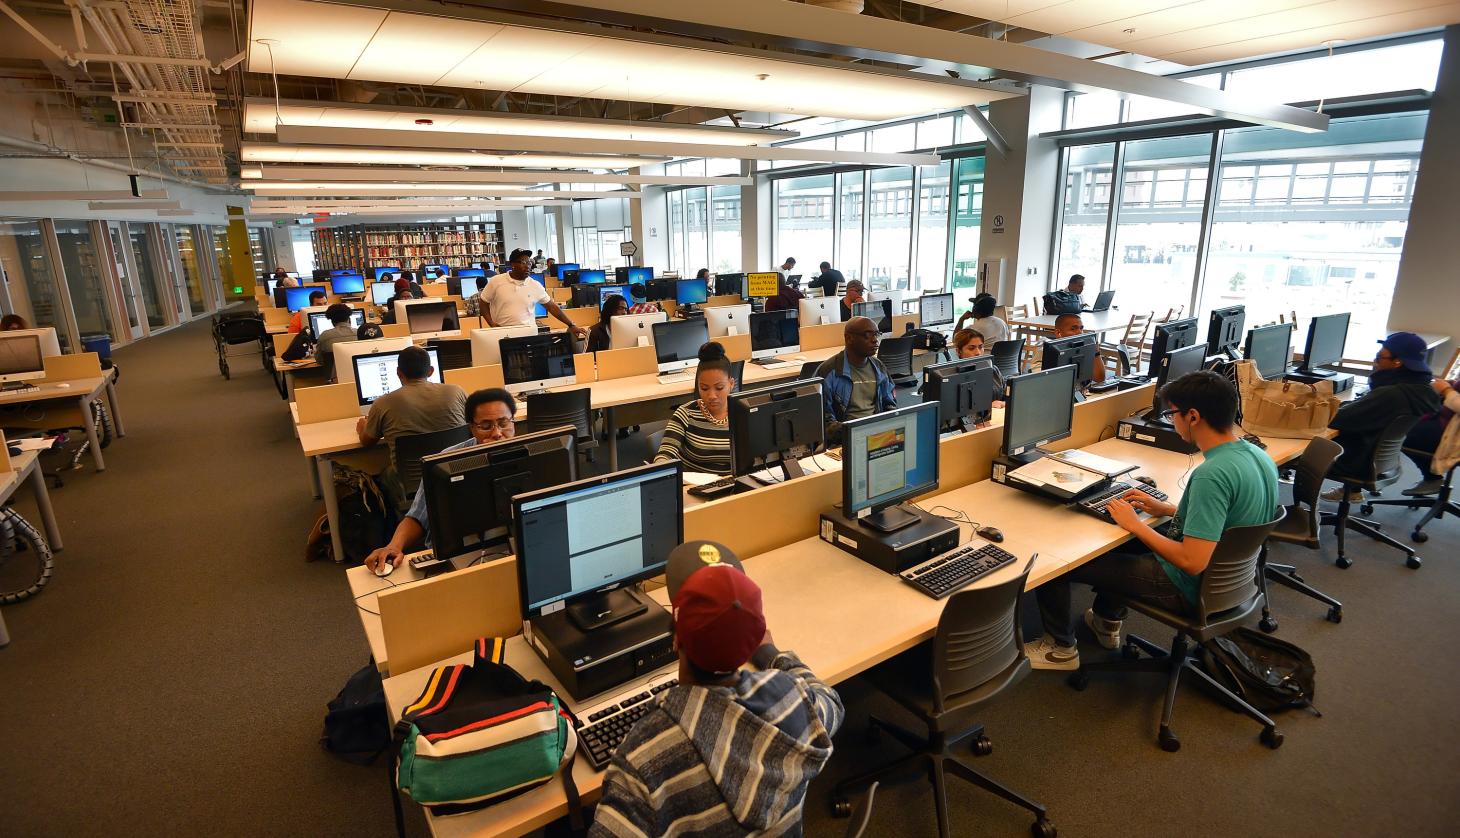 Students Using the Equipment of the Computer Lab 